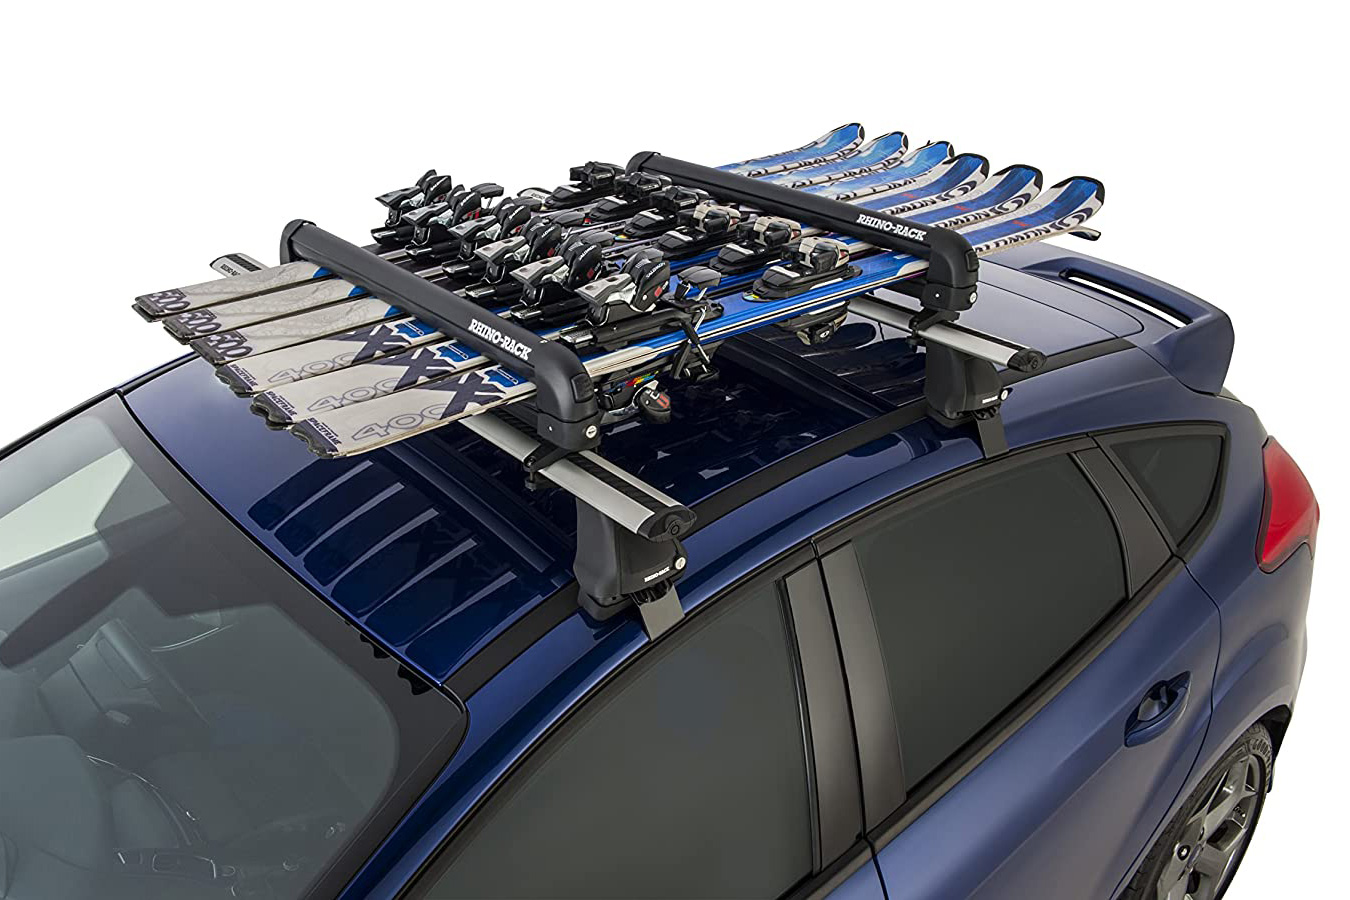 Car Roof Ski Carrier Lockable Ski Roof Rack Carrier Snowboard Top Holder 2 Skis and 4 Snowboards Capacity 